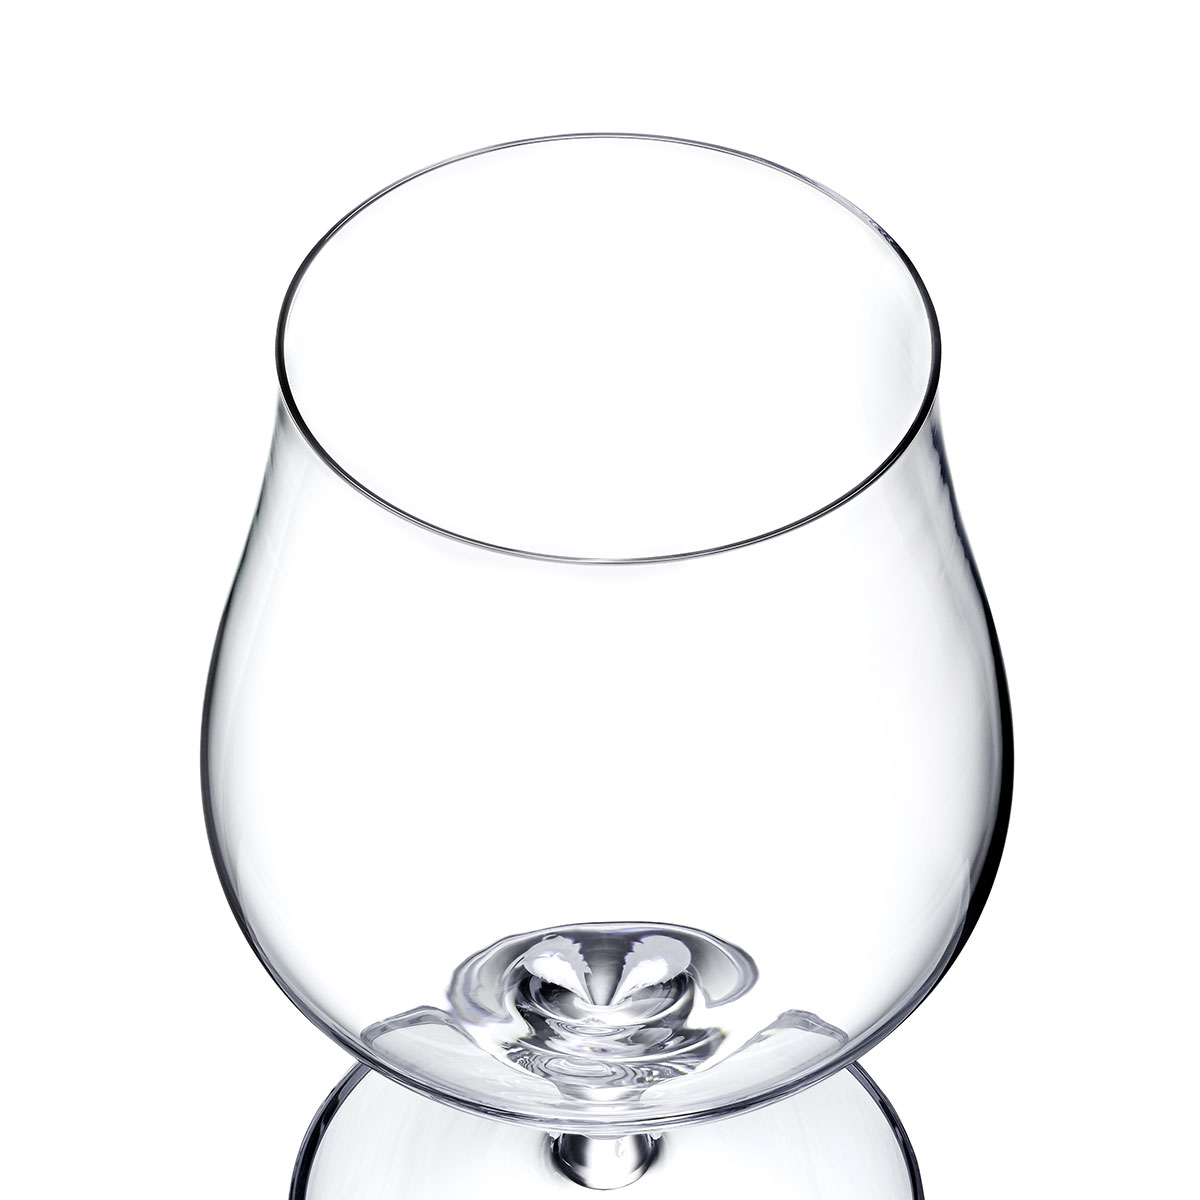 Waterford Craft Brew Snifter Glass, Pair